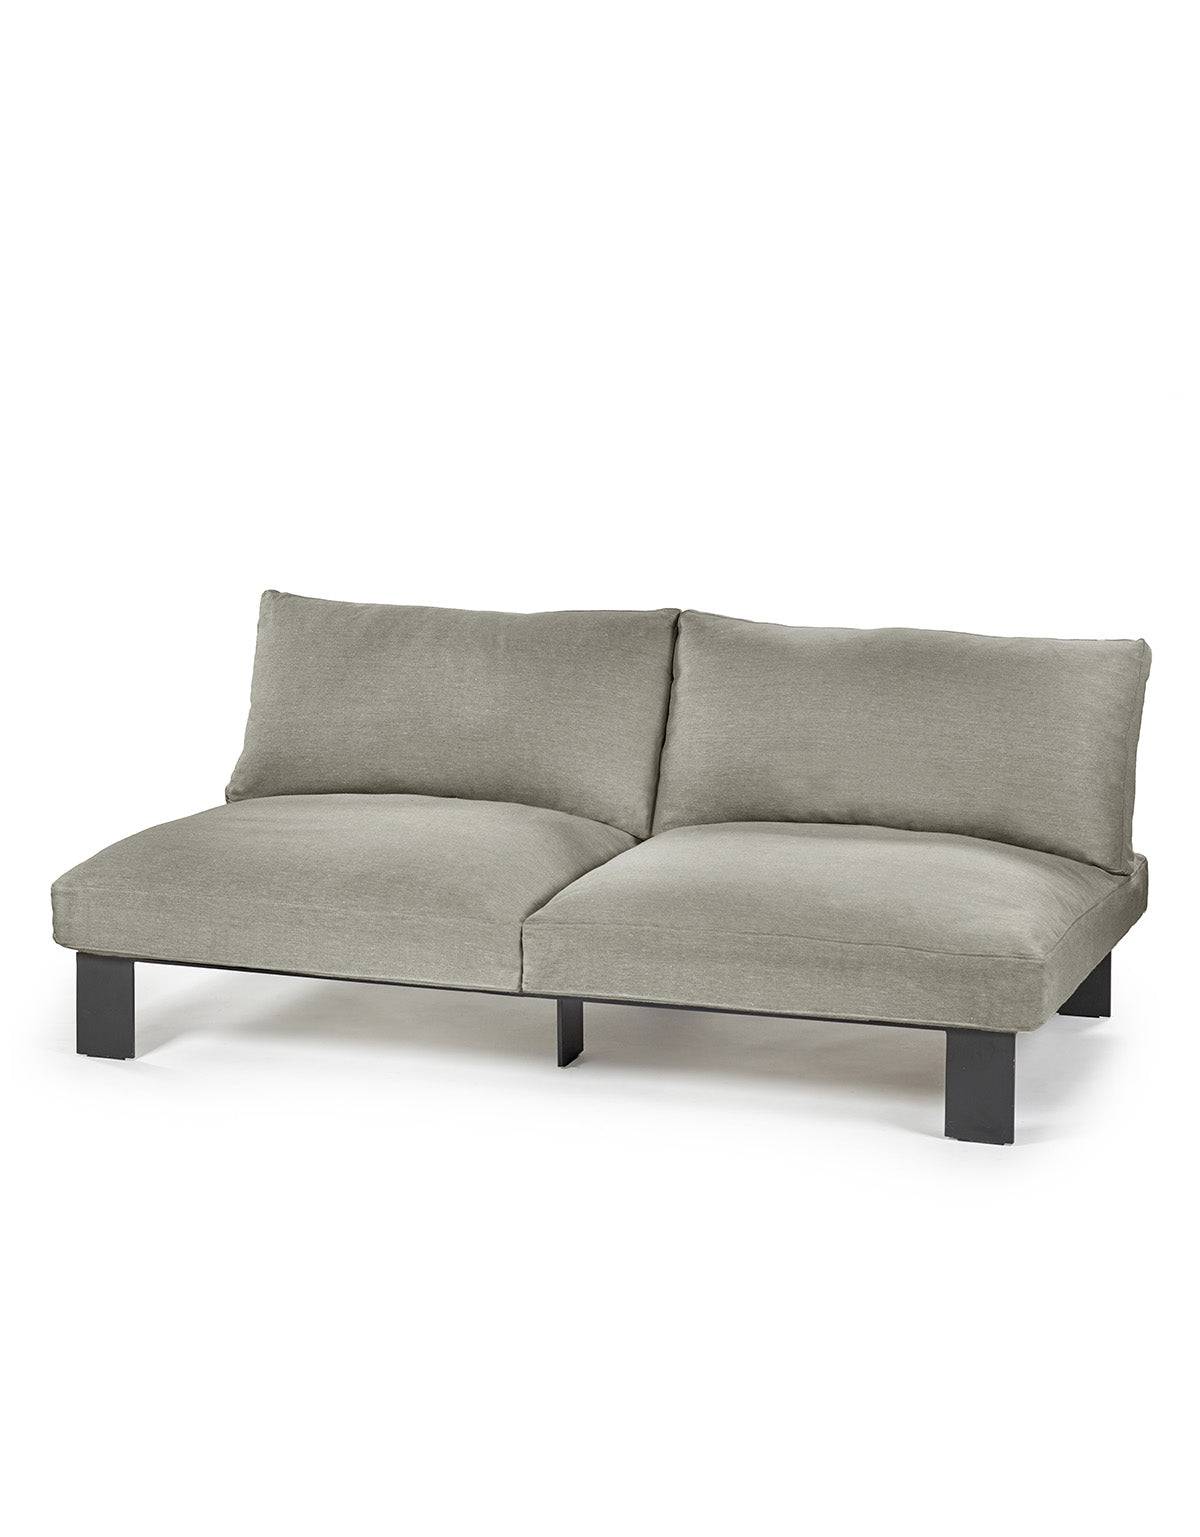 Mombaers Sofa - Taupe - THAT COOL LIVING